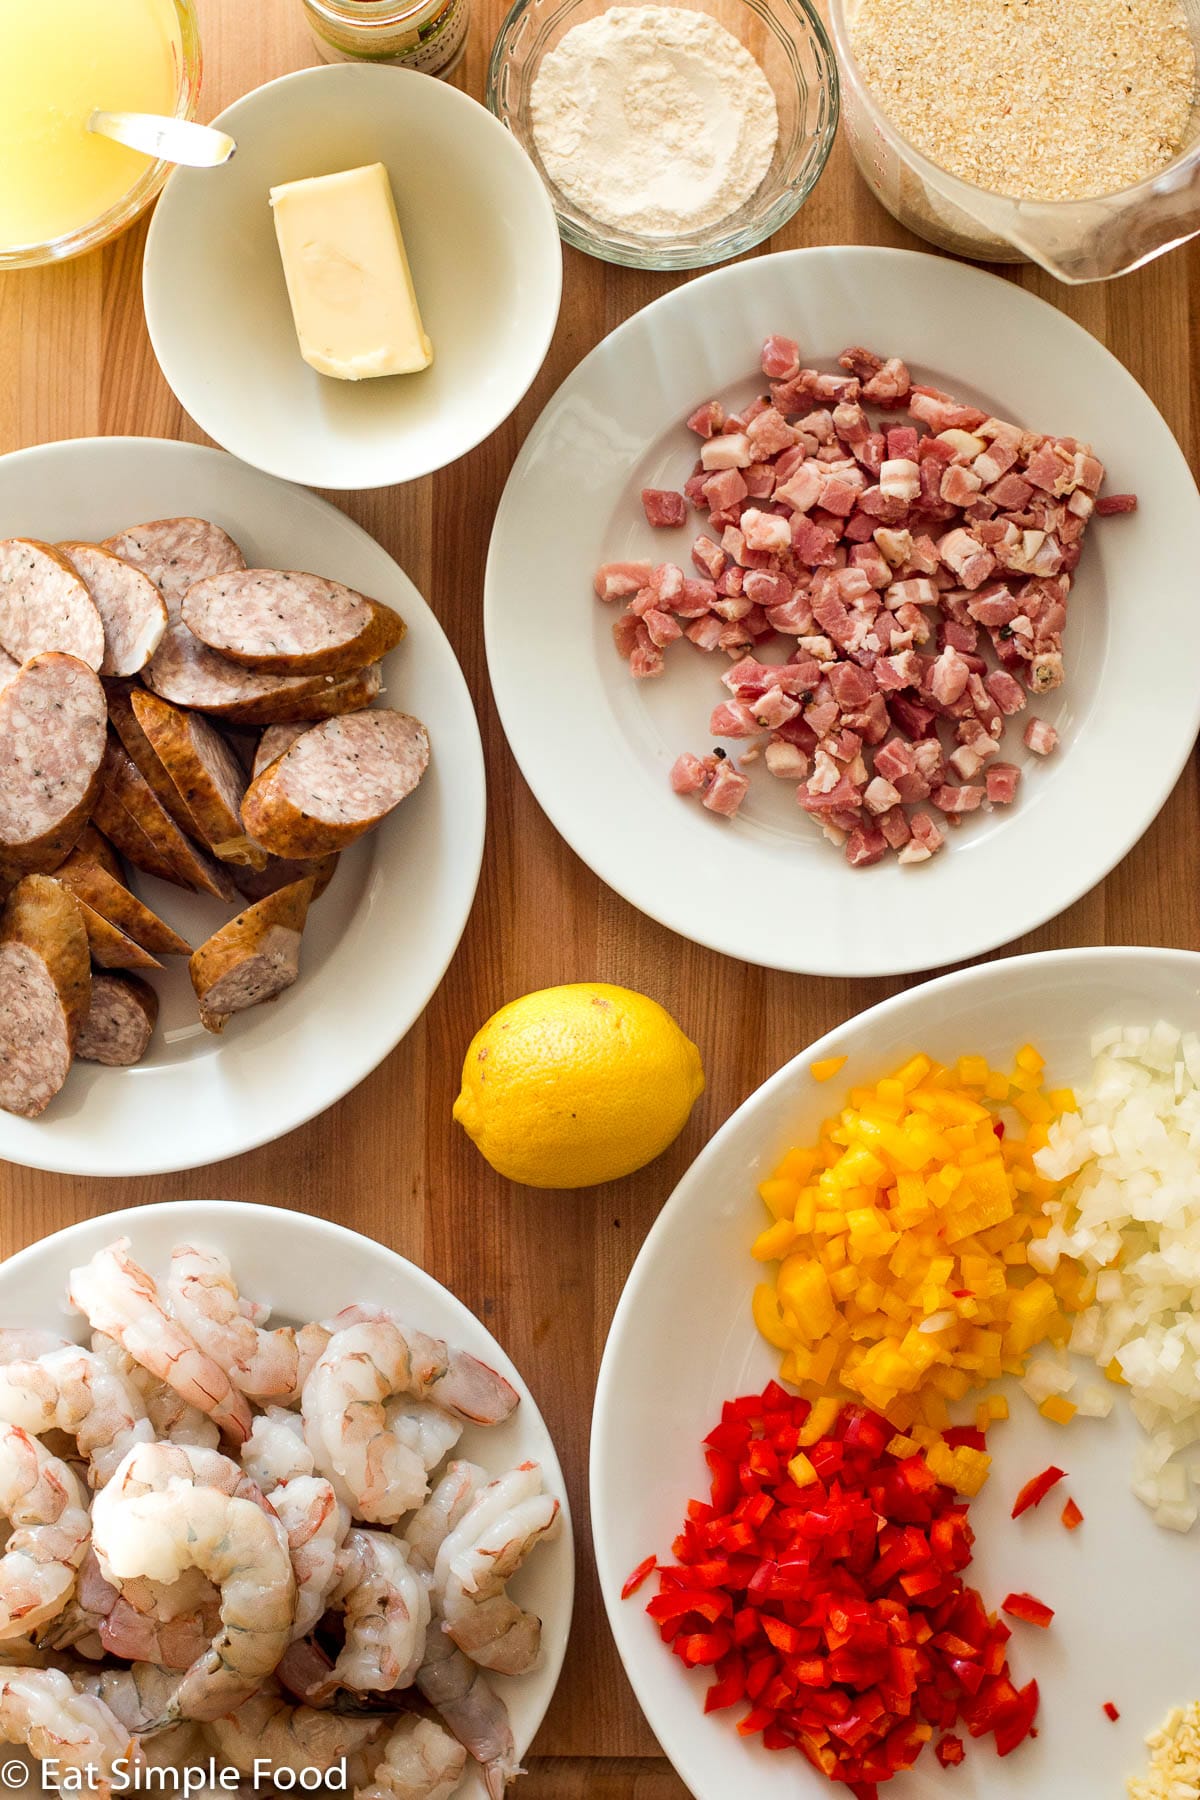 Raw peeled and devined shrimp, red and yellow peppers diced, diced onions, sliced preserved sausage, raw diced pancetta, butter bowl, bowl of flour, bowl of grits, bowl of broth, one whole lemon.